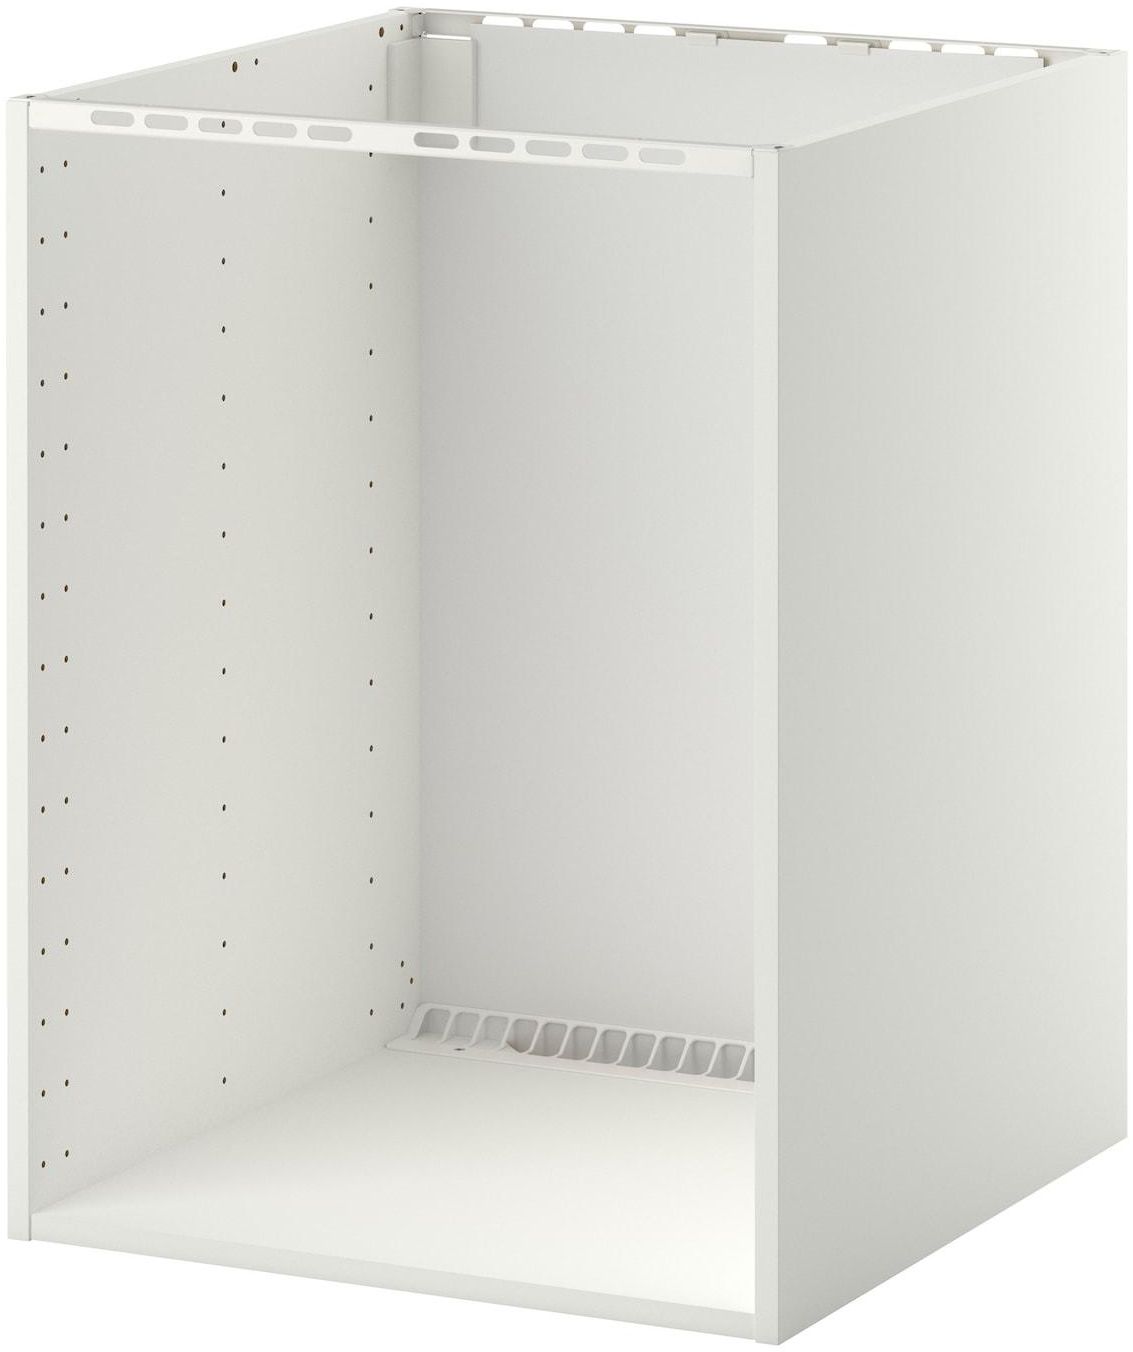 METOD Base cabinet for built-in oven/sink - white 60x60x80 cm